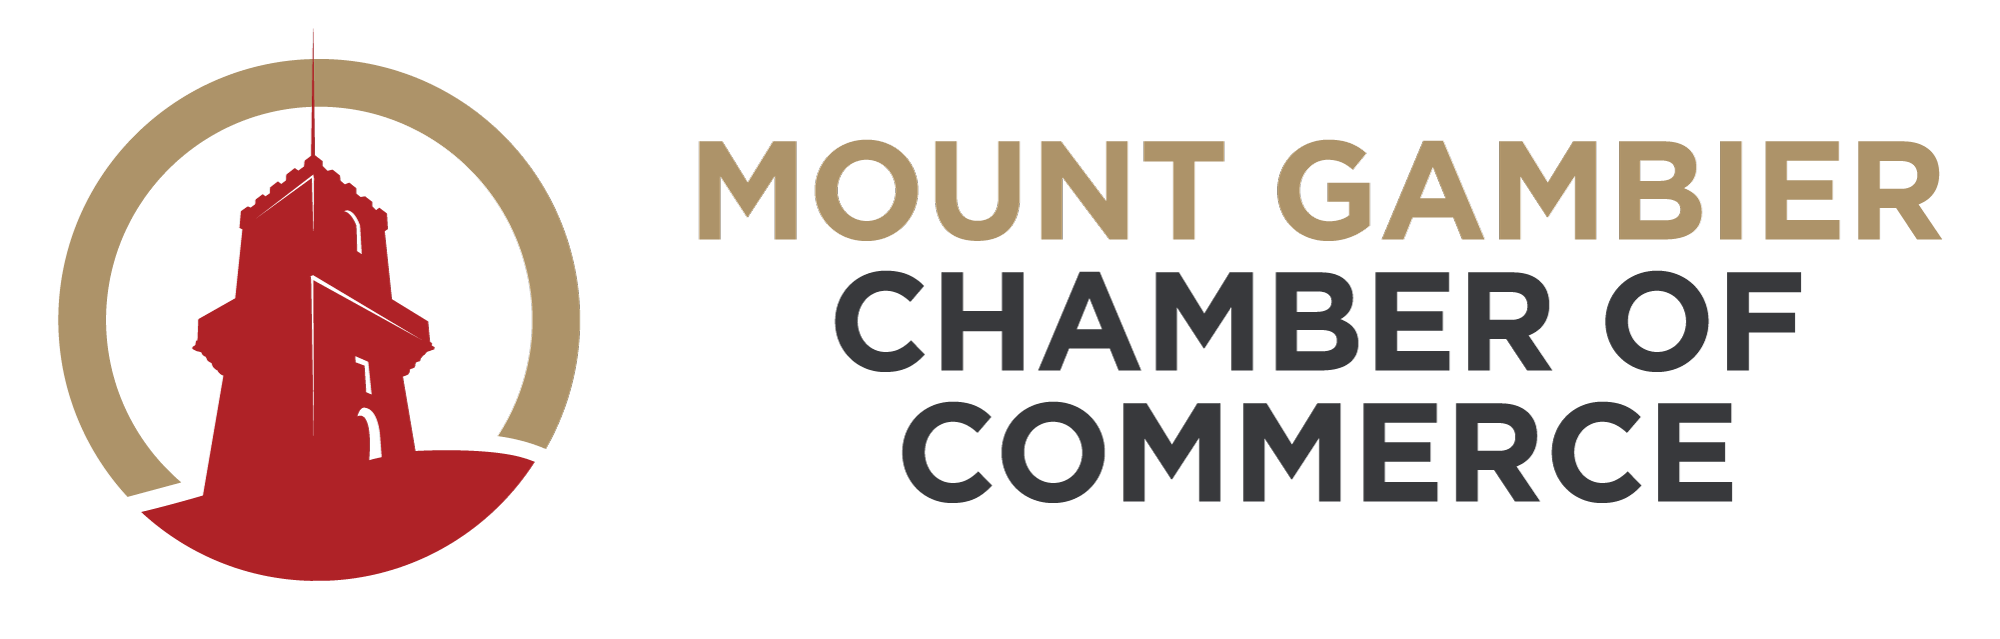 Mount Gambier Chamber of Commerce